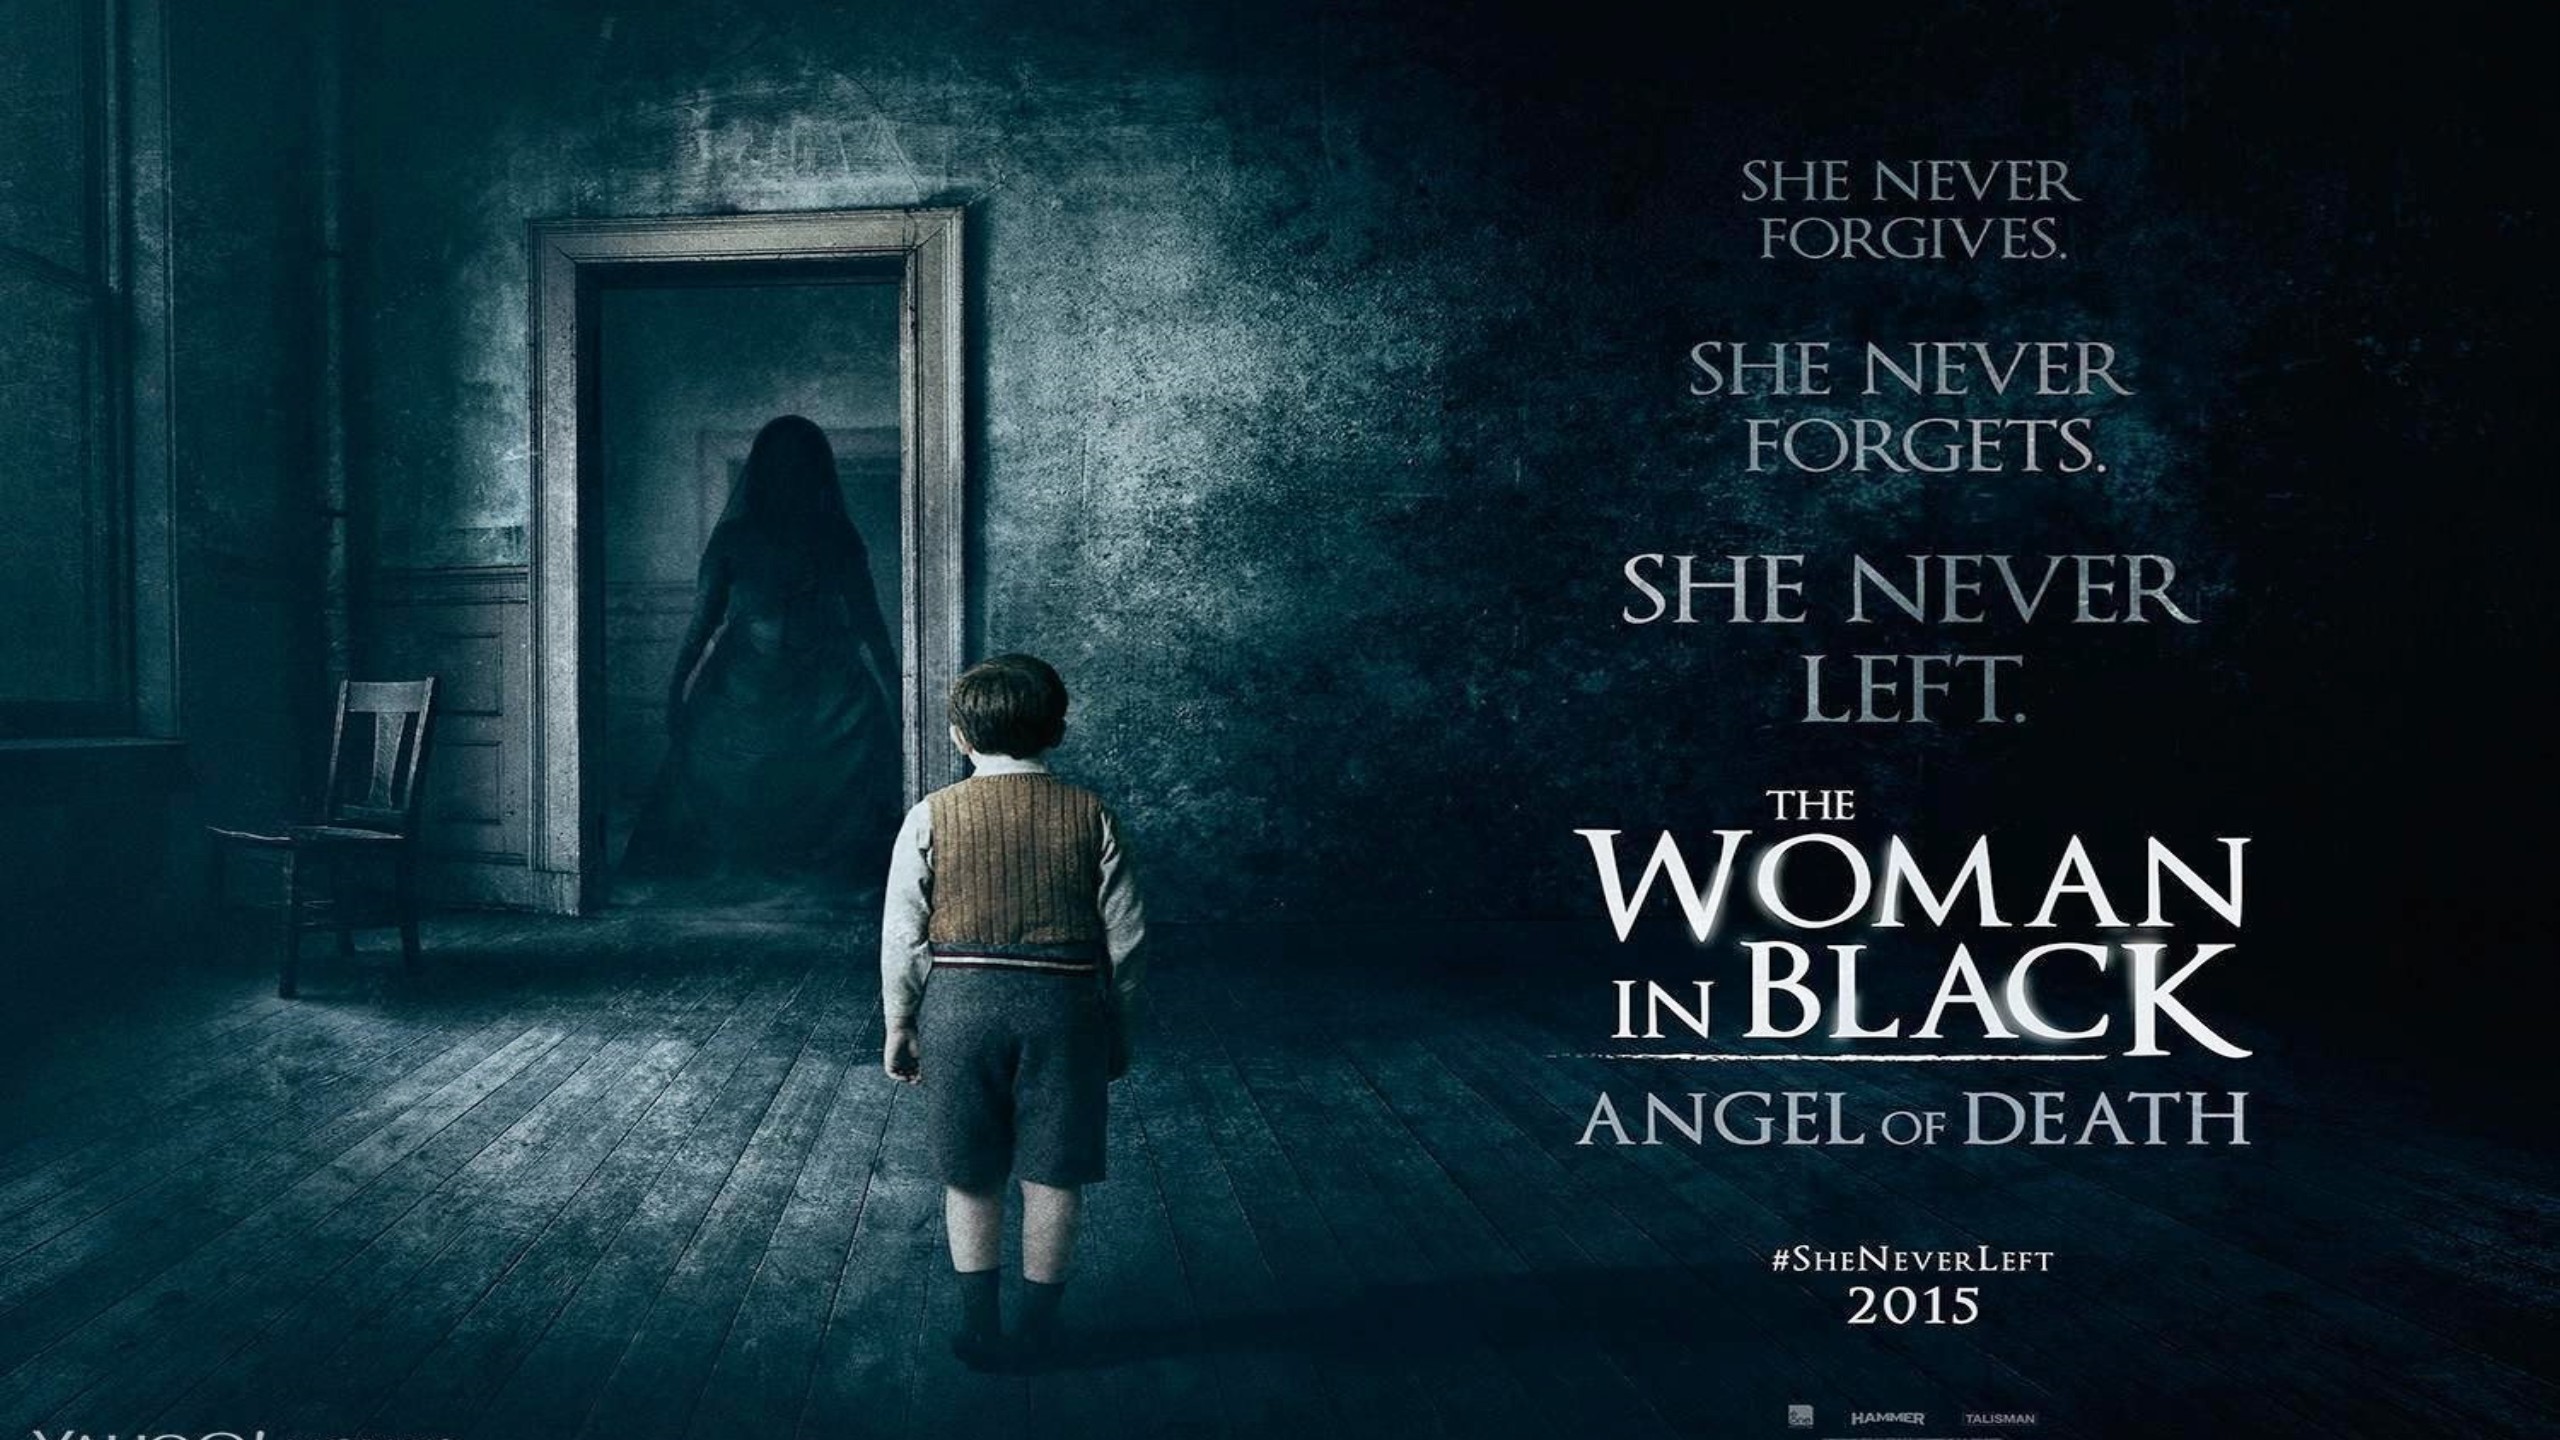 2560x1440 The Woman in Black – Angel of Death (2015)